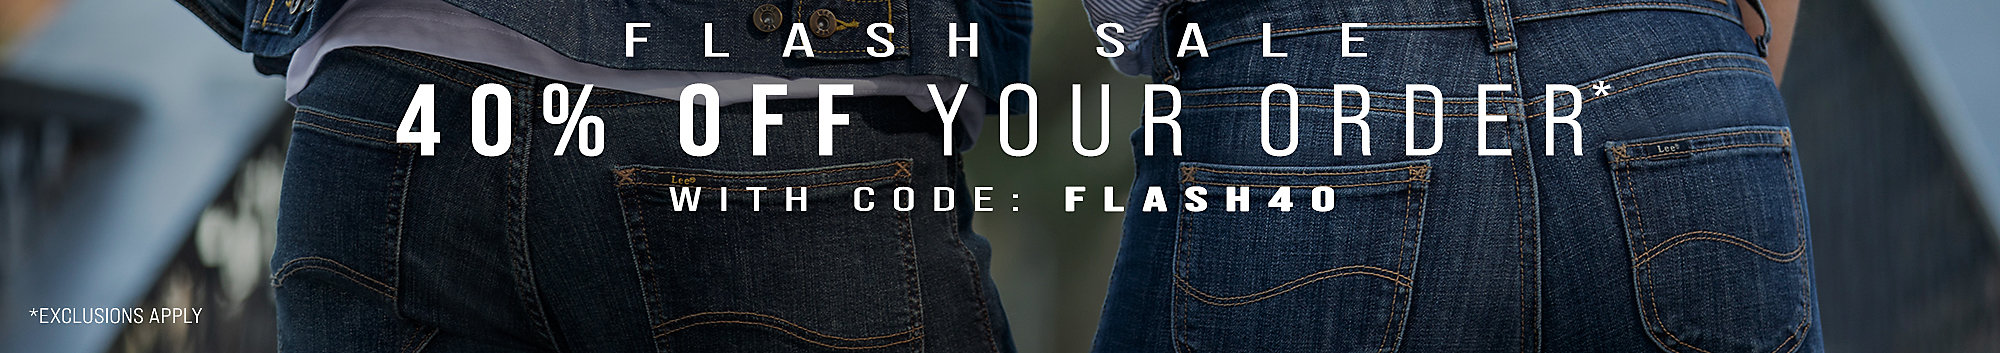 40% Off Your Order* with Code FLASH40